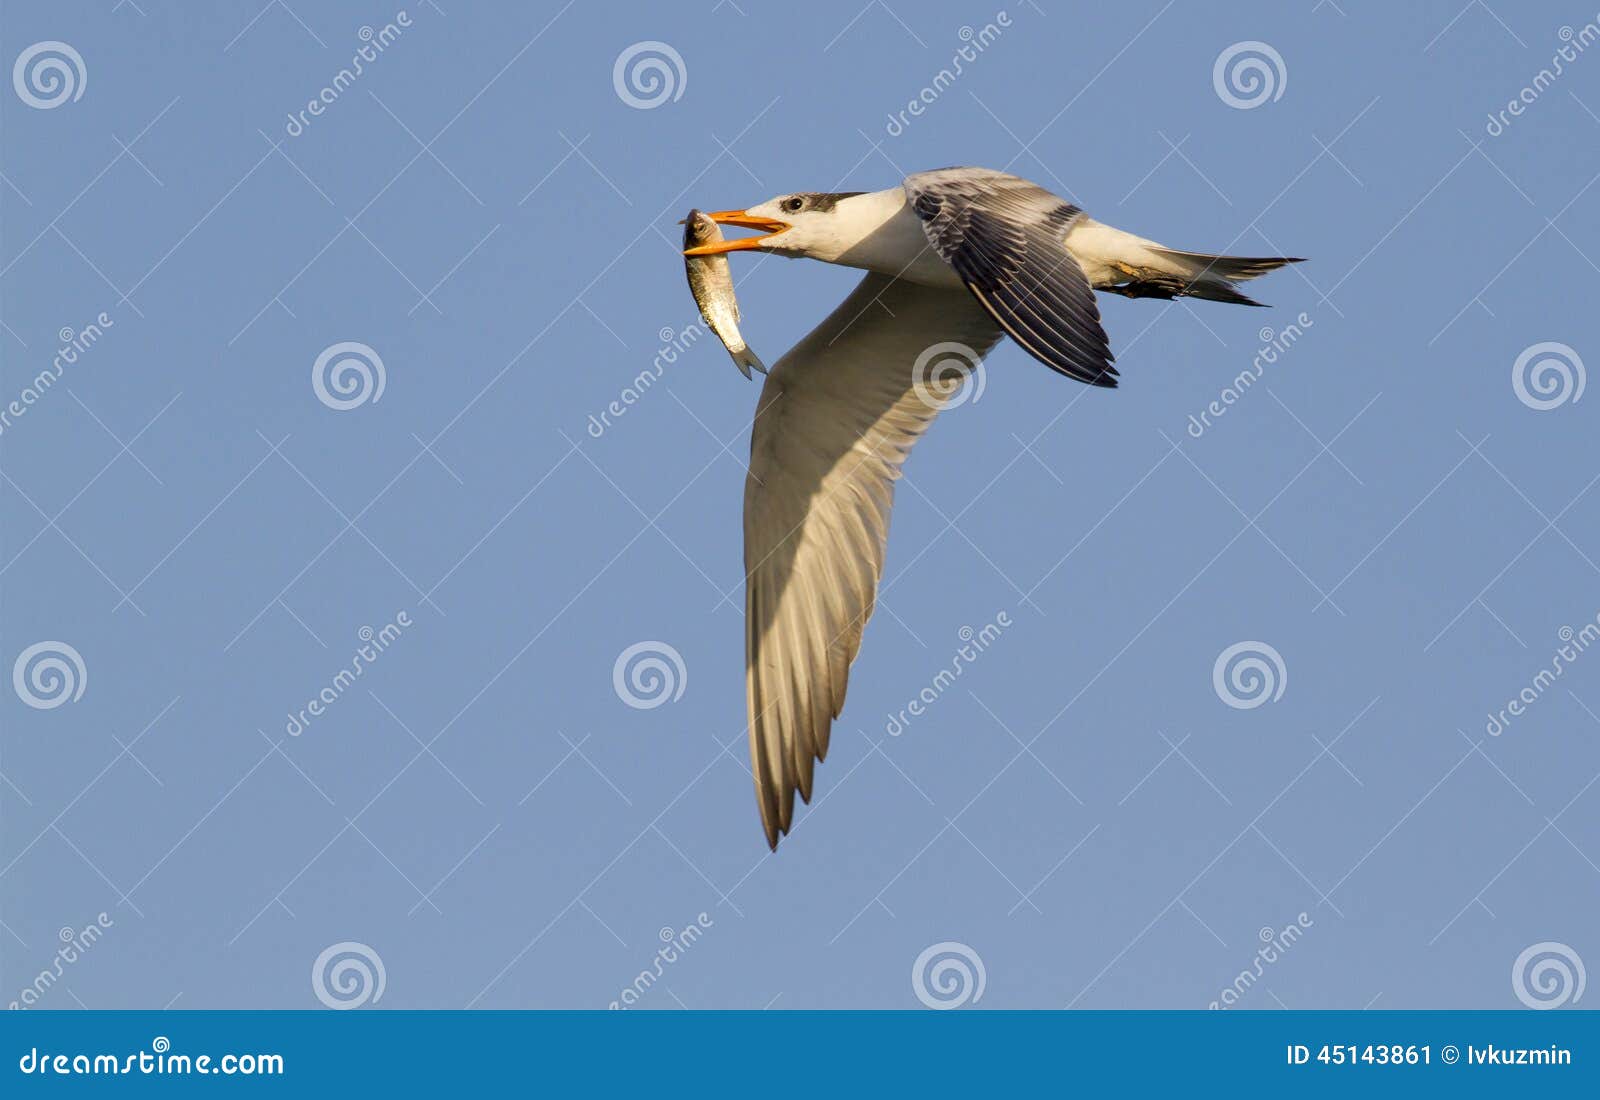 royal tern (sterna maxima) flying with a fish